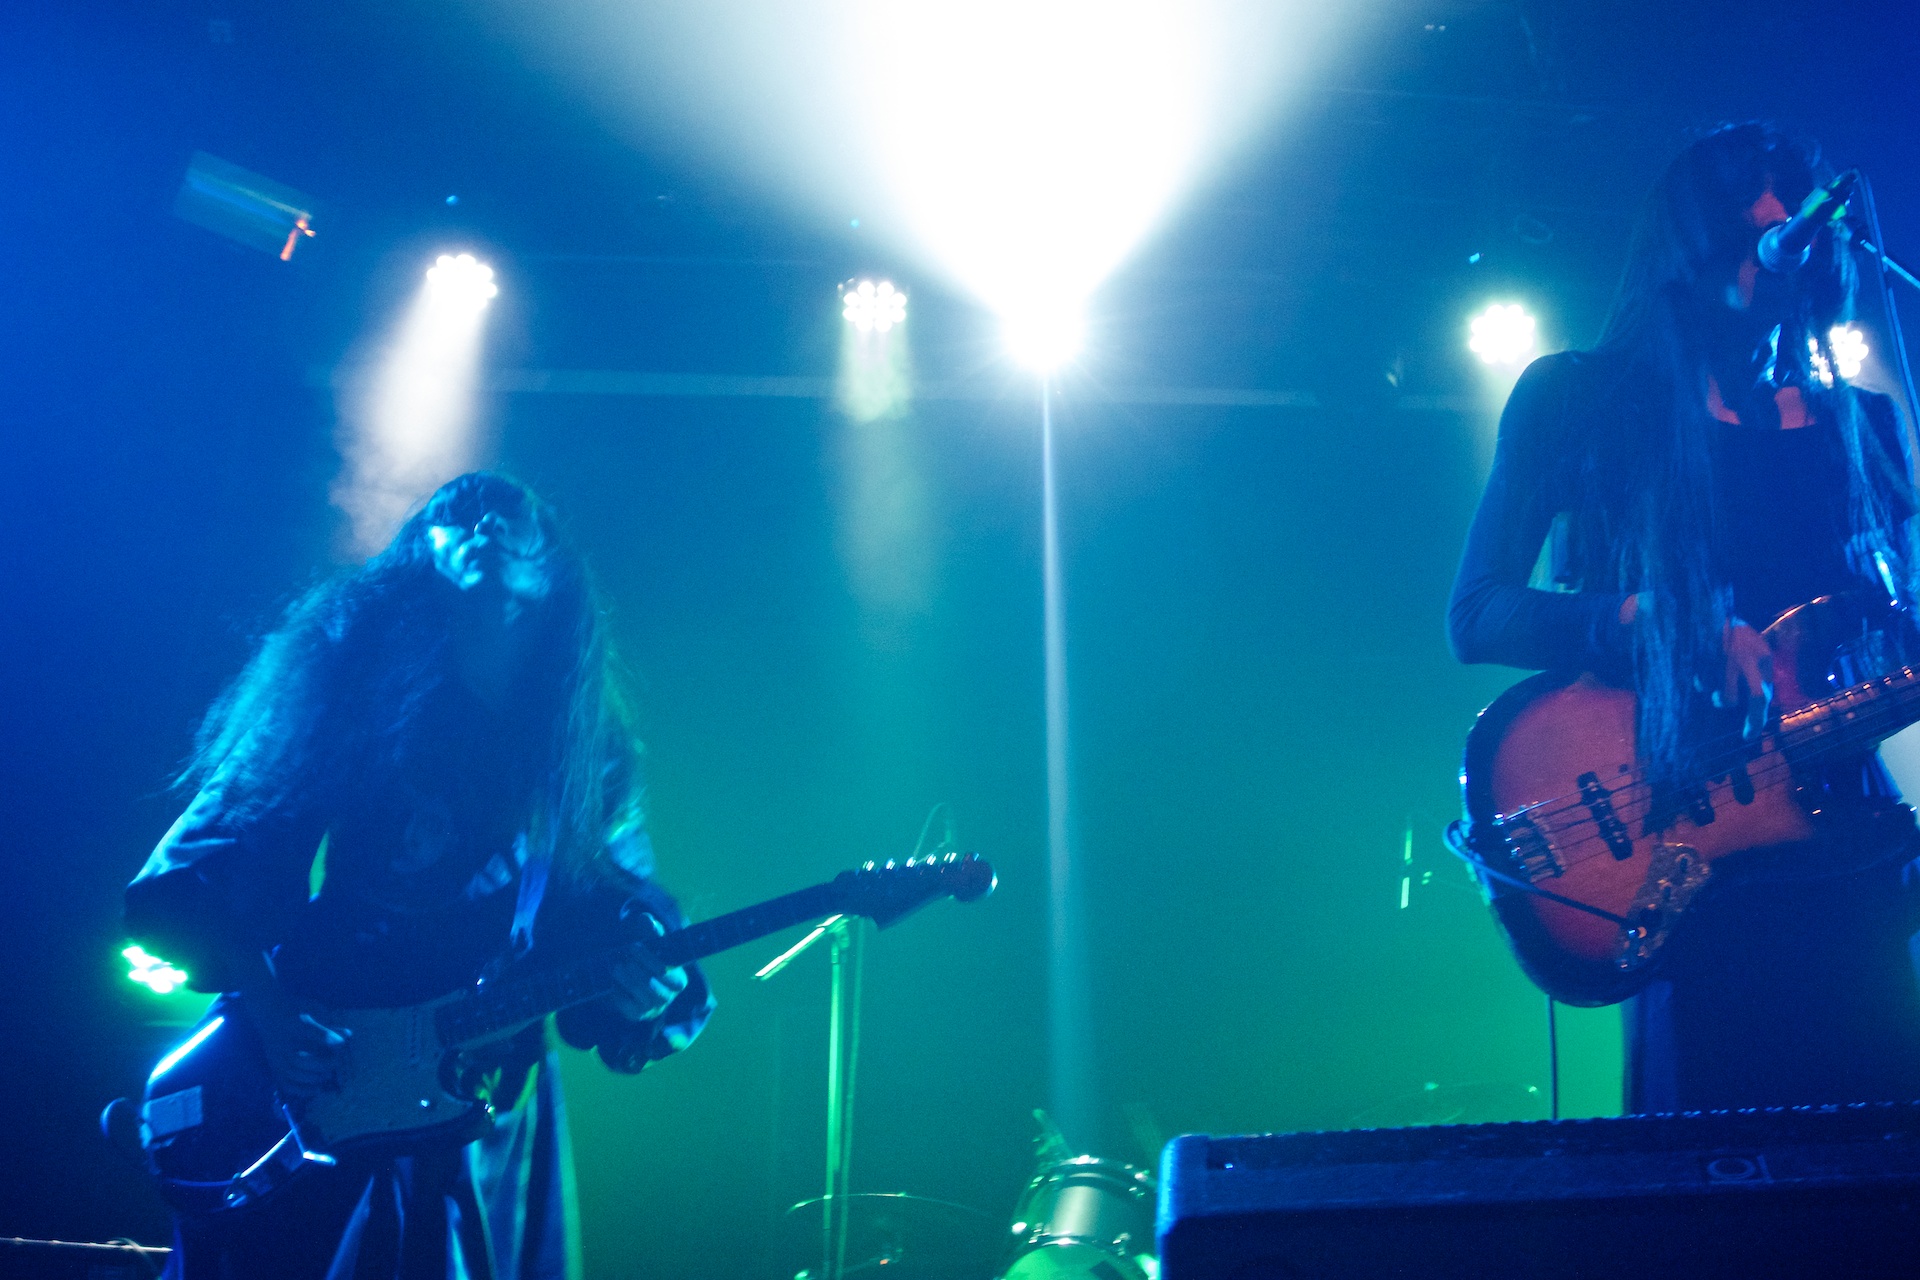 two men playing guitars on stage in front of green and blue lights